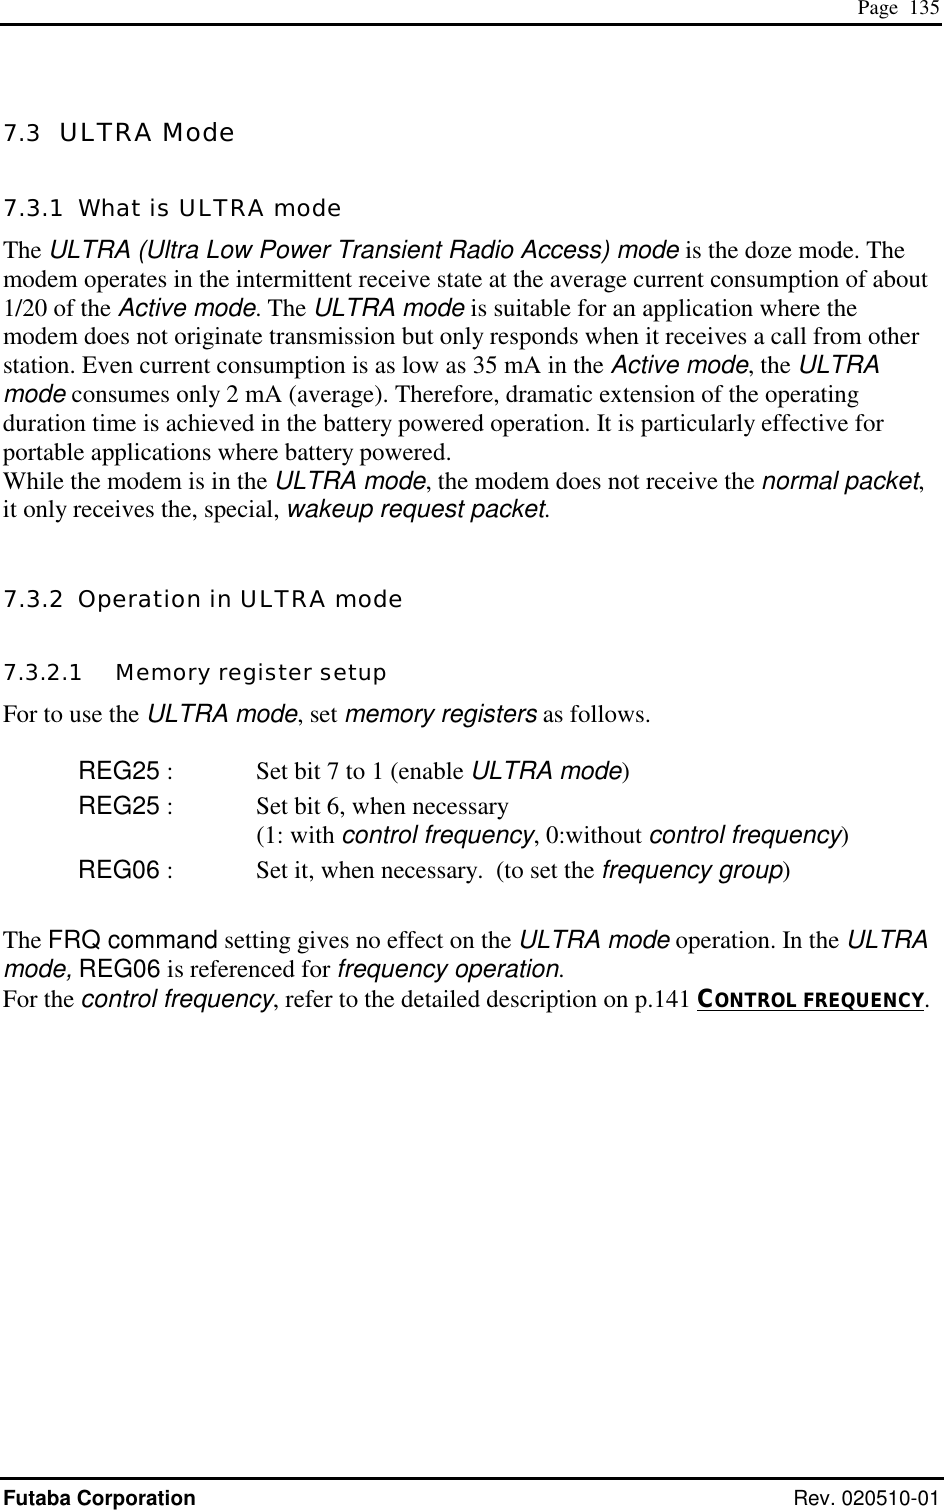  Page  135 Futaba Corporation Rev. 020510-01 7.3  ULTRA Mode 7.3.1  What is ULTRA mode The ULTRA (Ultra Low Power Transient Radio Access) mode is the doze mode. The modem operates in the intermittent receive state at the average current consumption of about 1/20 of the Active mode. The ULTRA mode is suitable for an application where the modem does not originate transmission but only responds when it receives a call from other station. Even current consumption is as low as 35 mA in the Active mode, the ULTRA mode consumes only 2 mA (average). Therefore, dramatic extension of the operating duration time is achieved in the battery powered operation. It is particularly effective for portable applications where battery powered. While the modem is in the ULTRA mode, the modem does not receive the normal packet, it only receives the, special, wakeup request packet.  7.3.2  Operation in ULTRA mode 7.3.2.1   Memory register setup For to use the ULTRA mode, set memory registers as follows.  REG25 :  Set bit 7 to 1 (enable ULTRA mode) REG25 :   Set bit 6, when necessary (1: with control frequency, 0:without control frequency) REG06 :  Set it, when necessary.  (to set the frequency group)  The FRQ command setting gives no effect on the ULTRA mode operation. In the ULTRA mode, REG06 is referenced for frequency operation. For the control frequency, refer to the detailed description on p.141 CONTROL FREQUENCY.